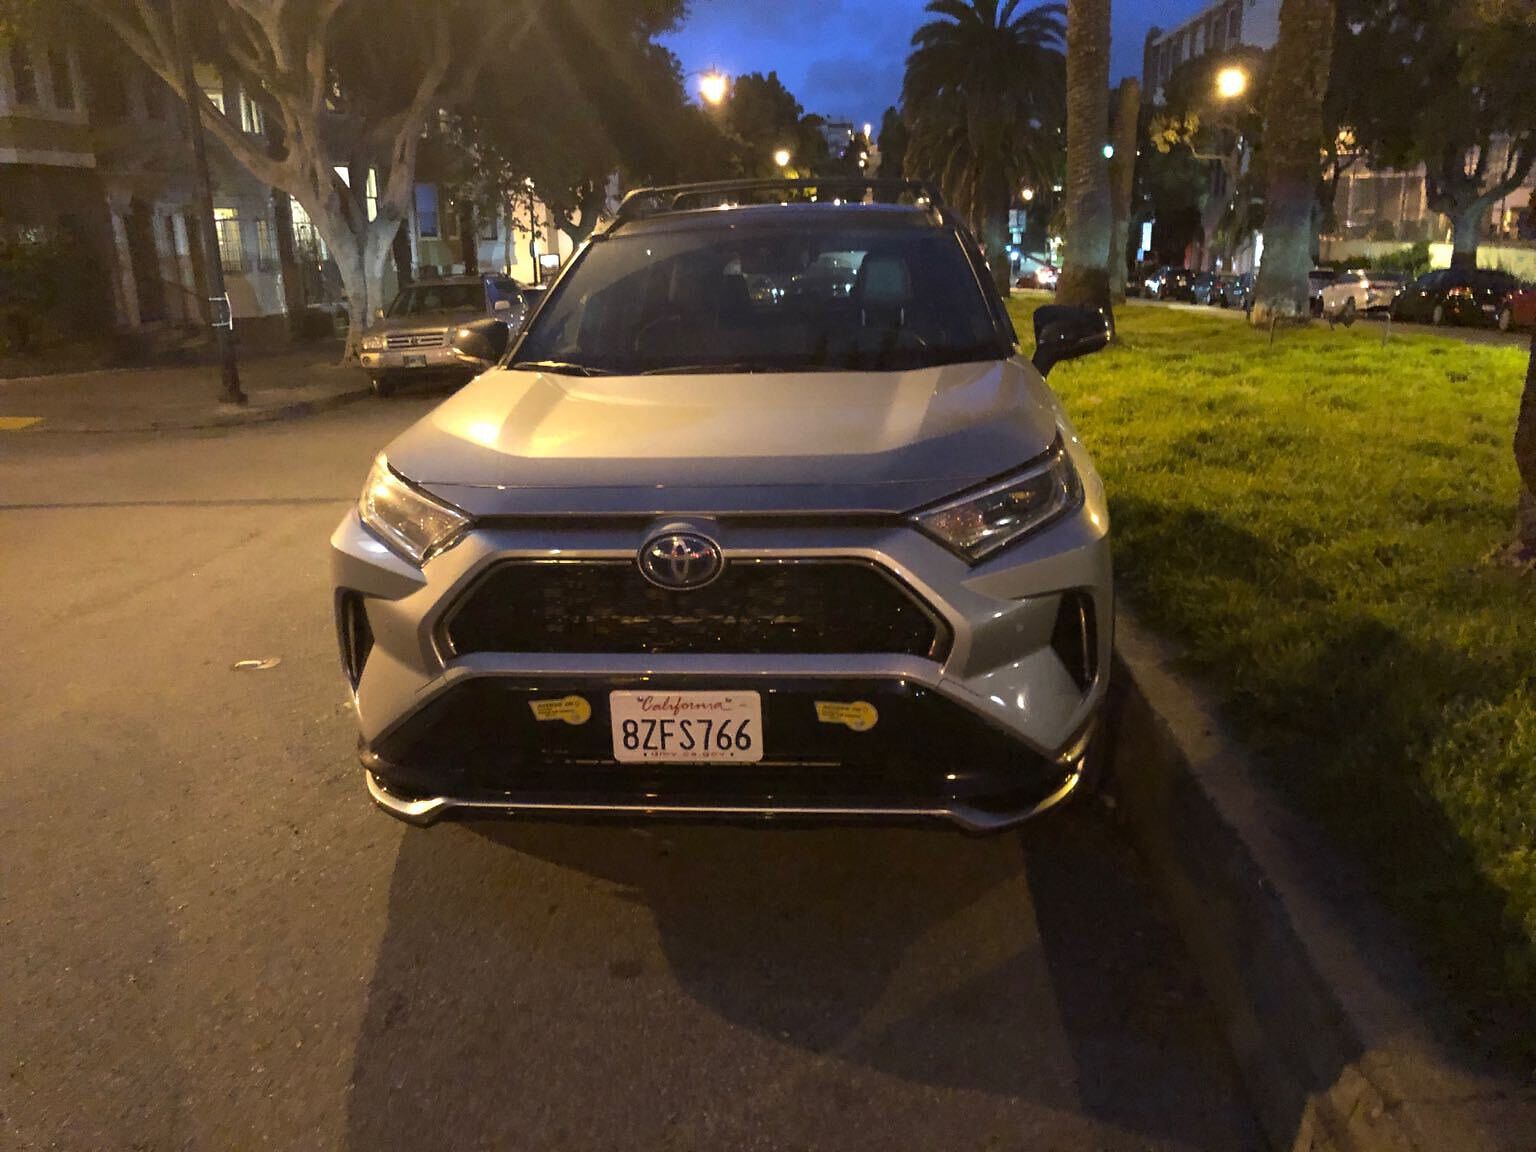 Photo of car in the street with license plate 8ZFS766 in California